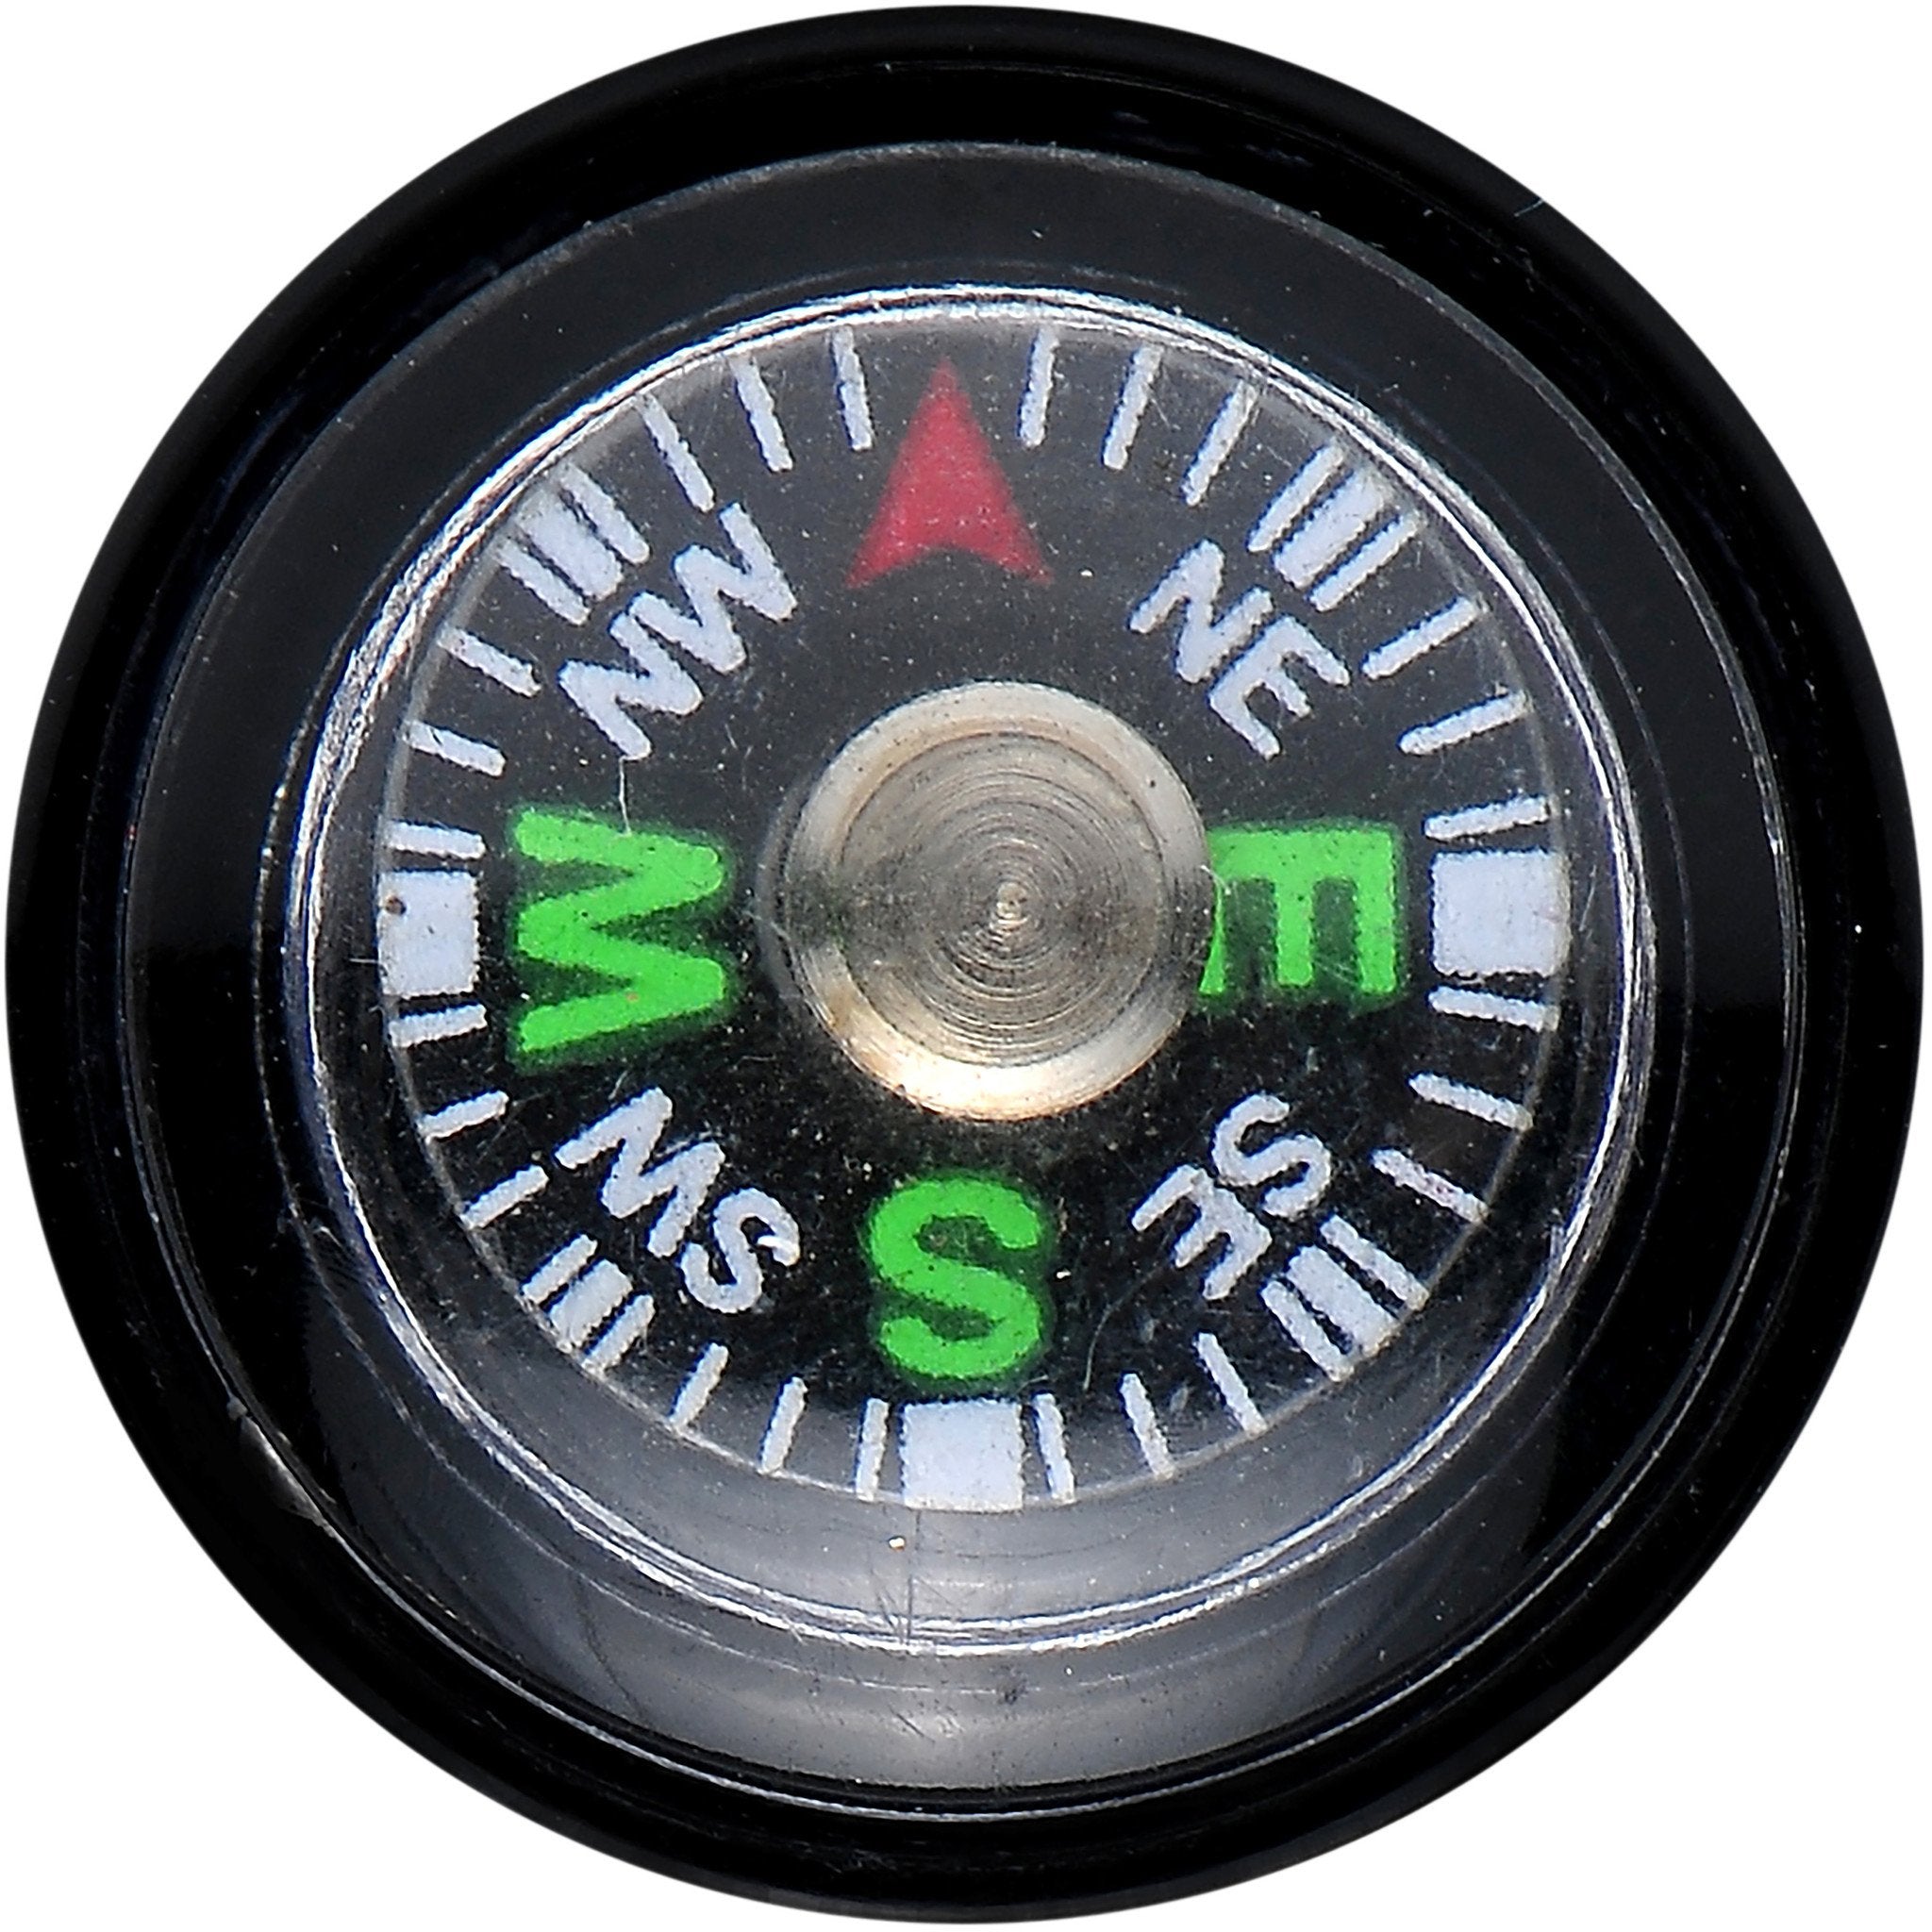 Acrylic Black Find Your Direction Compass Screw Fit Plug 0 Gauge to 1"